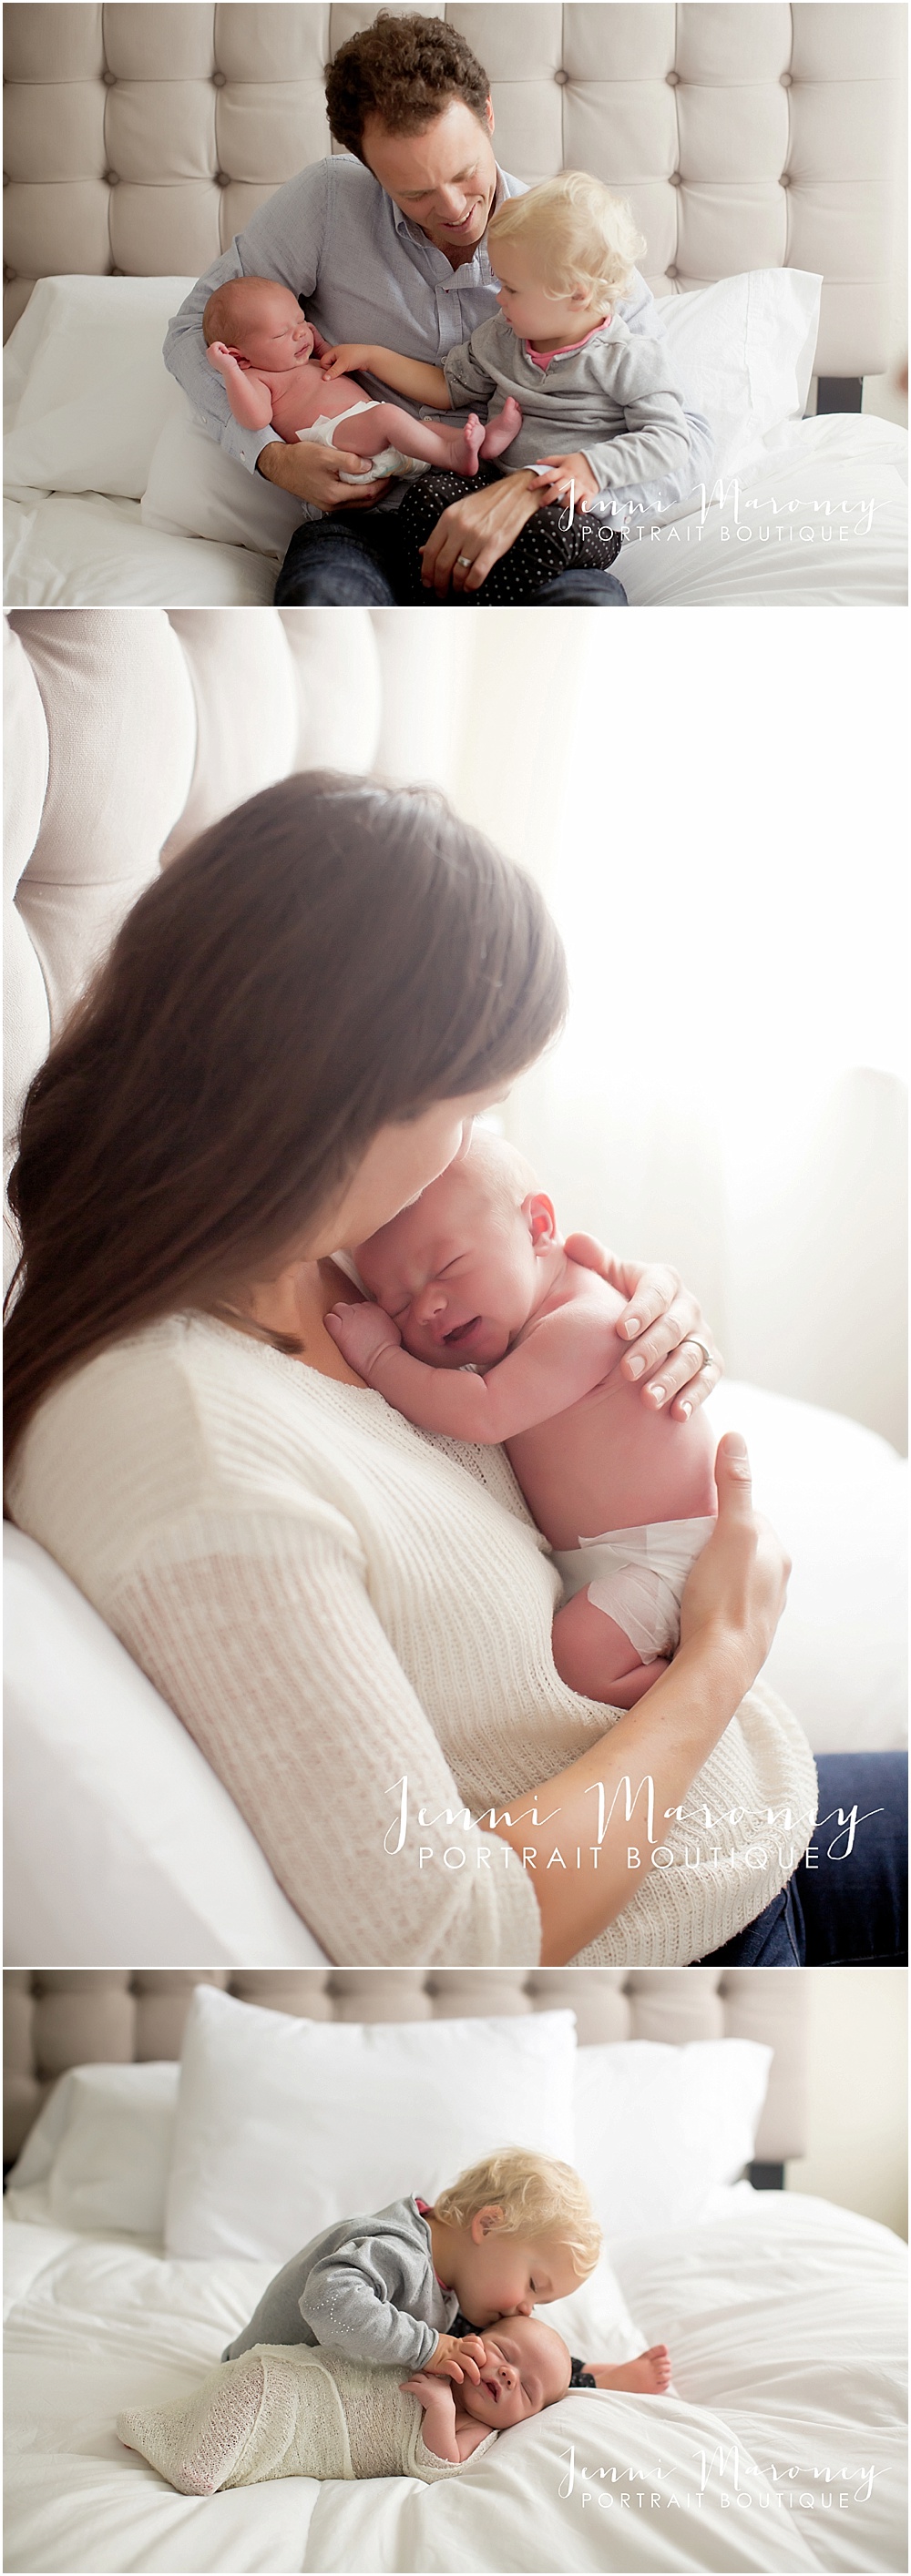 Denver newborn photographer and Boulder baby photographer, Jenni Maroney owns Jenni Maroney Portrait Boutique and specializes in simple and sweet newborn photography.